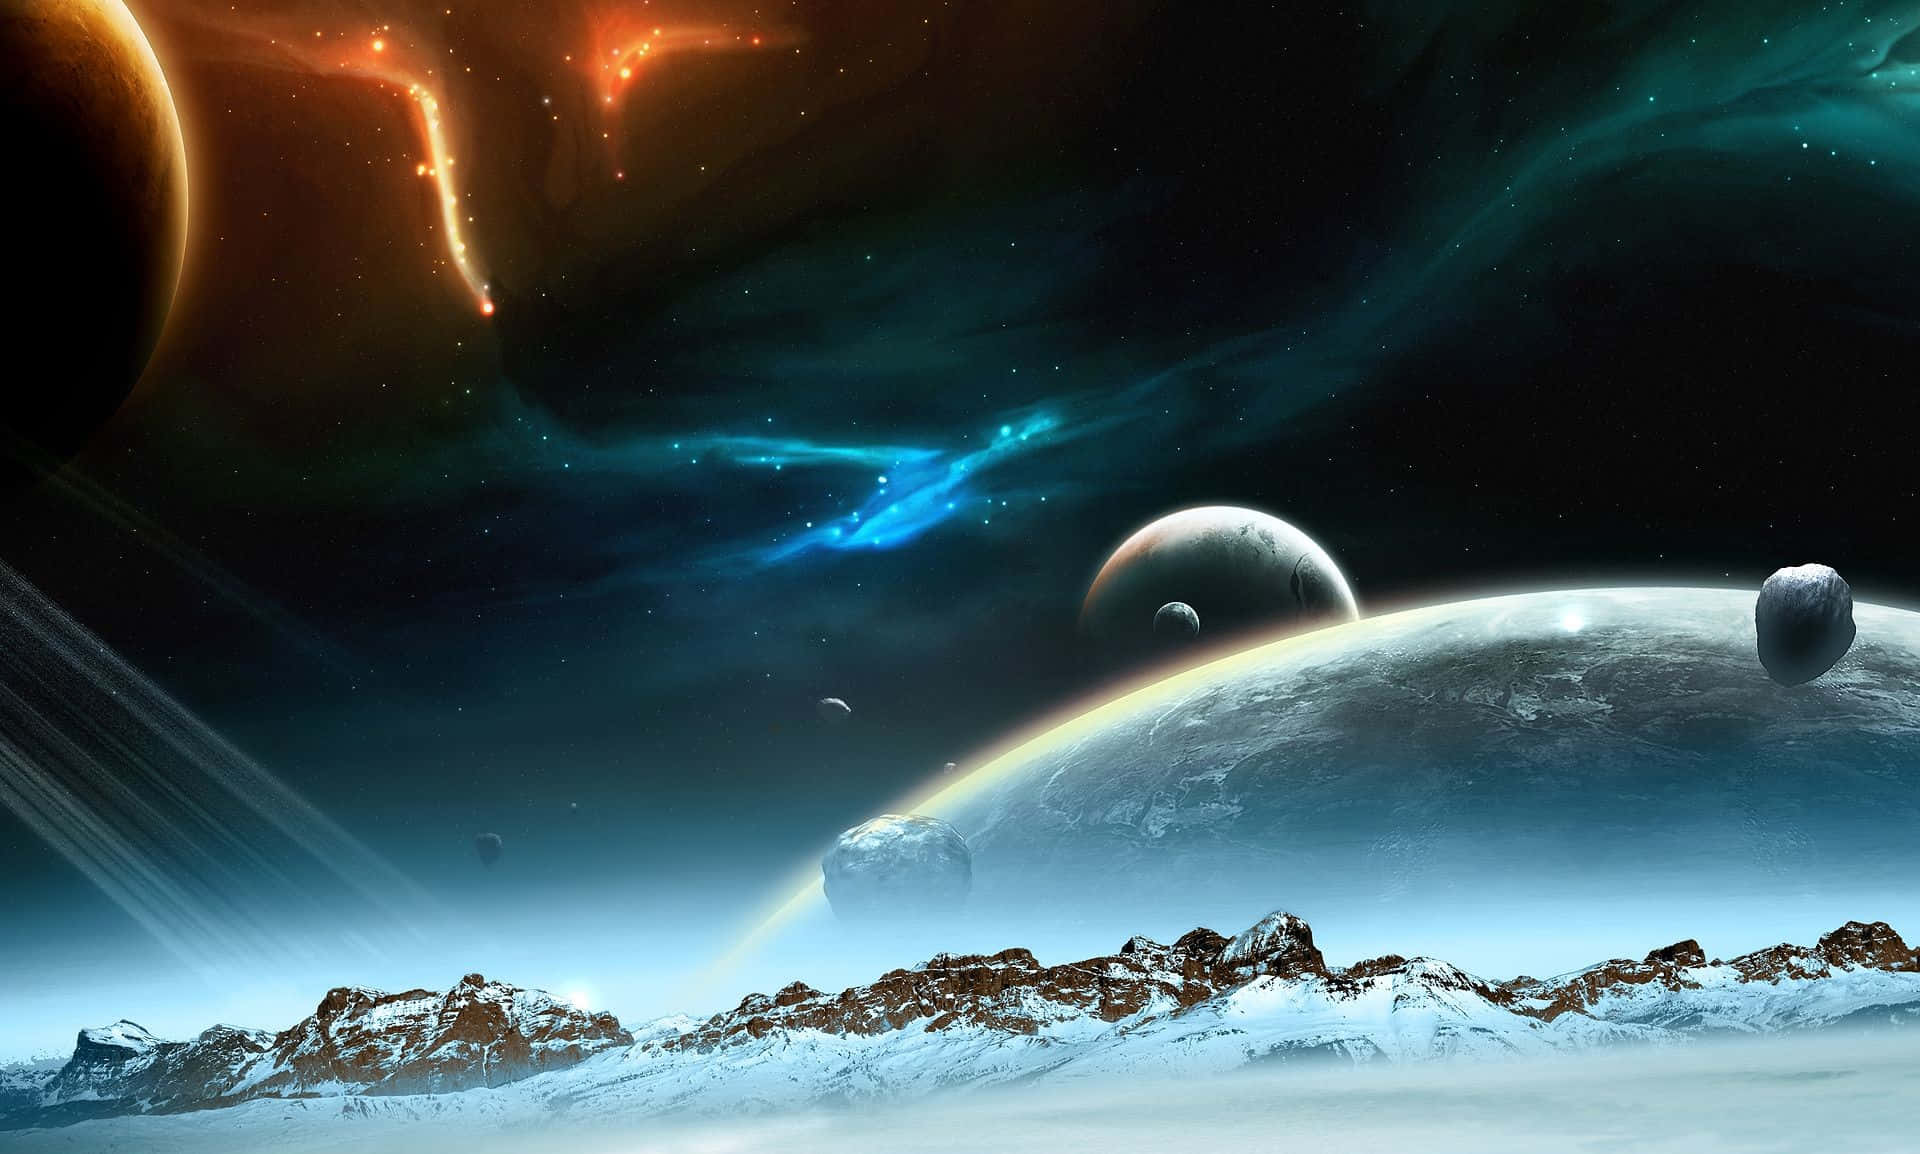 Take a journey to the edges of the universe and explore its breathtaking beauty